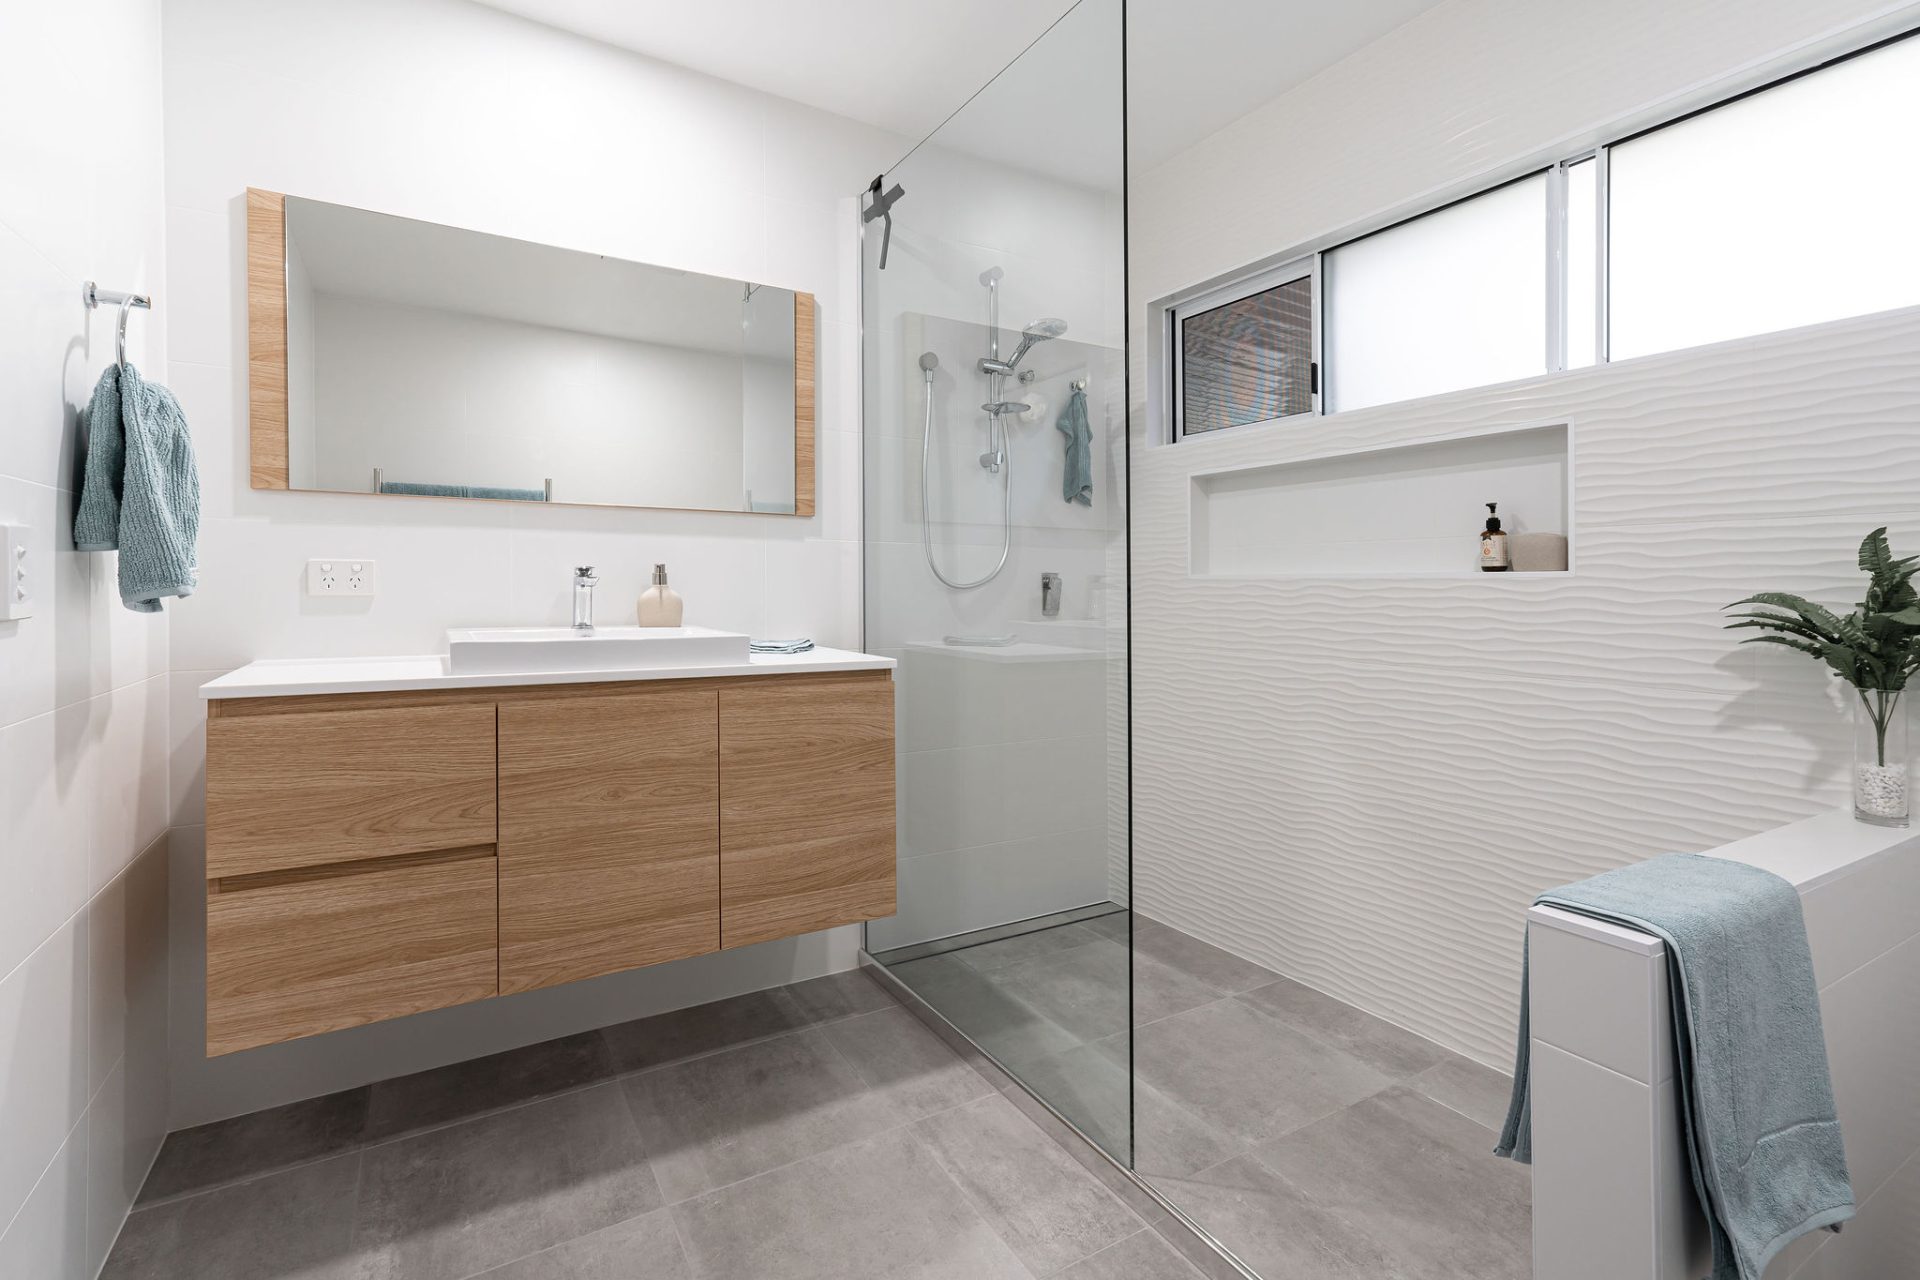 Minimalist bathroom design with freestanding white bath, concrete floor and floating cabinetry